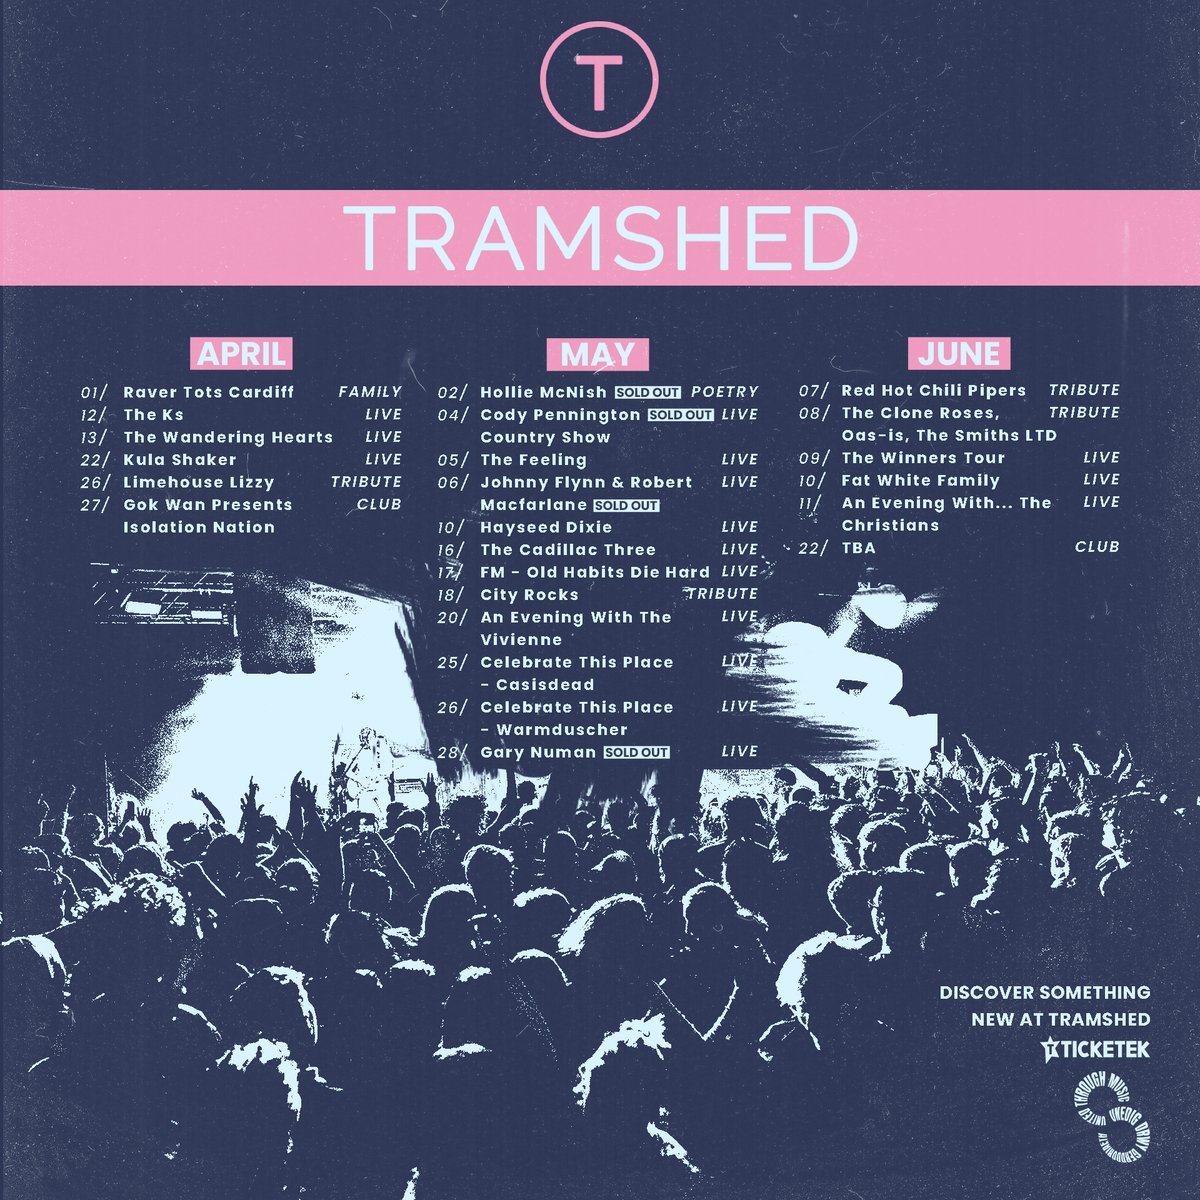 ✨COMPETITION!✨ Fancy winning a 2x tickets to a show of your choice at Tramshed in April, May or June? To enter, simply make sure you're following us, and reply to this post with the name of the show you'd like to go to! Good luck! Winner will be contacted on Thurs 4th April.